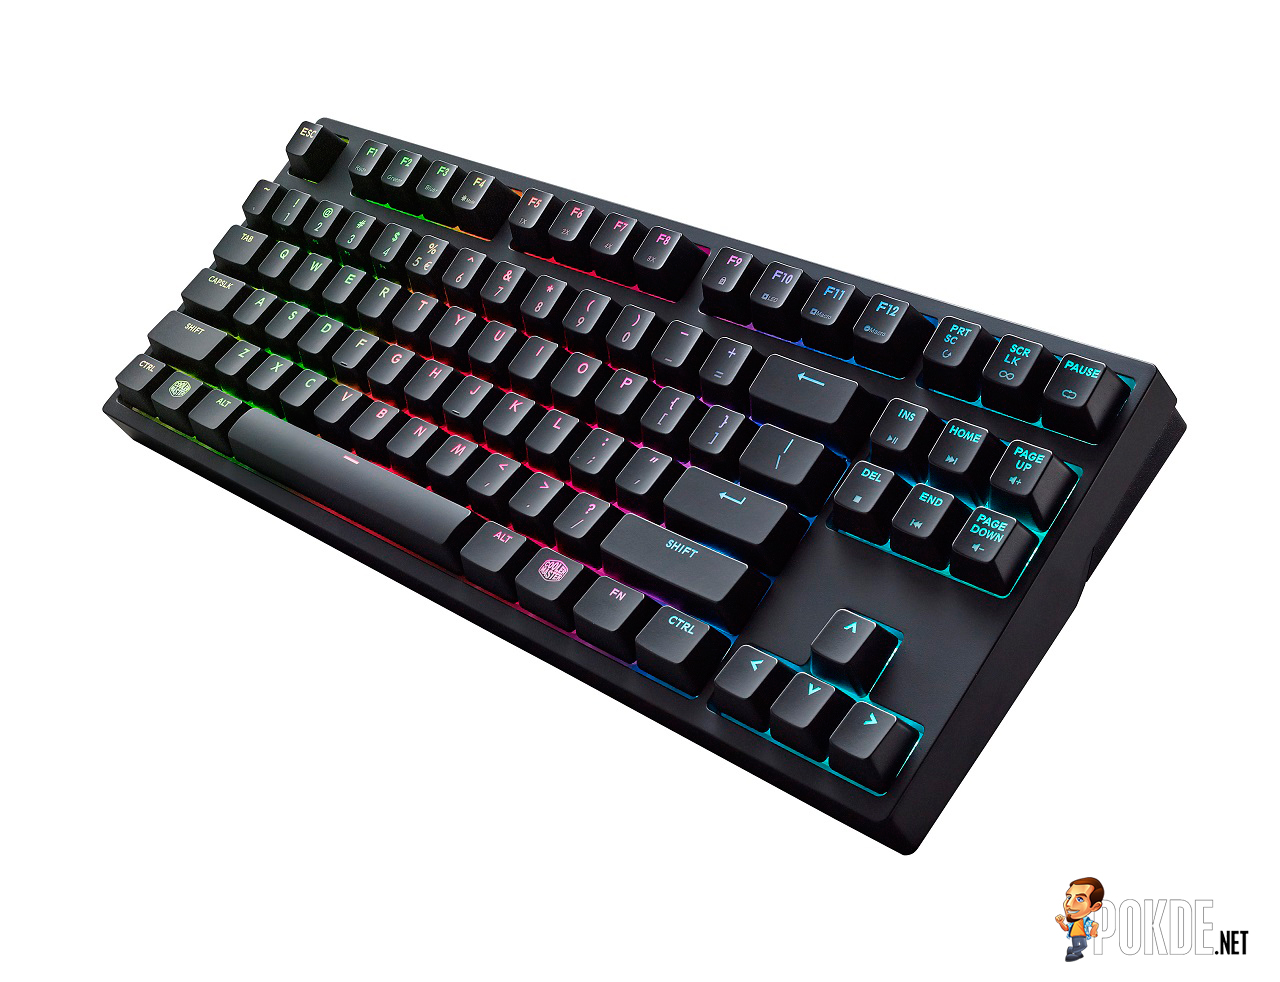 Cooler Master Announces RGB Keyboards 36